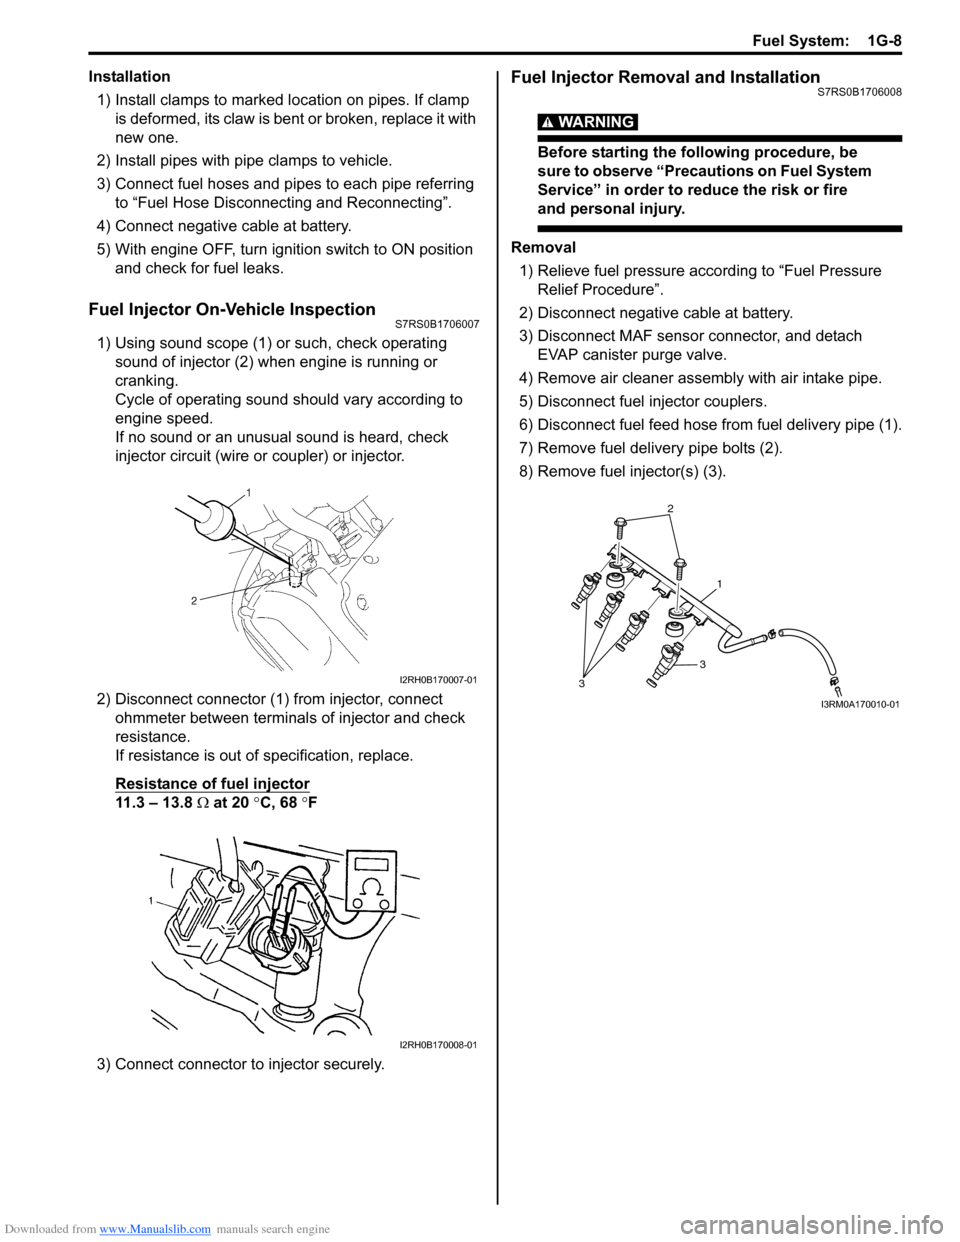 SUZUKI SWIFT 2006 2.G Service Workshop Manual Downloaded from www.Manualslib.com manuals search engine Fuel System:  1G-8
Installation1) Install clamps to marked location on pipes. If clamp  is deformed, its claw is bent  or broken, replace it wi